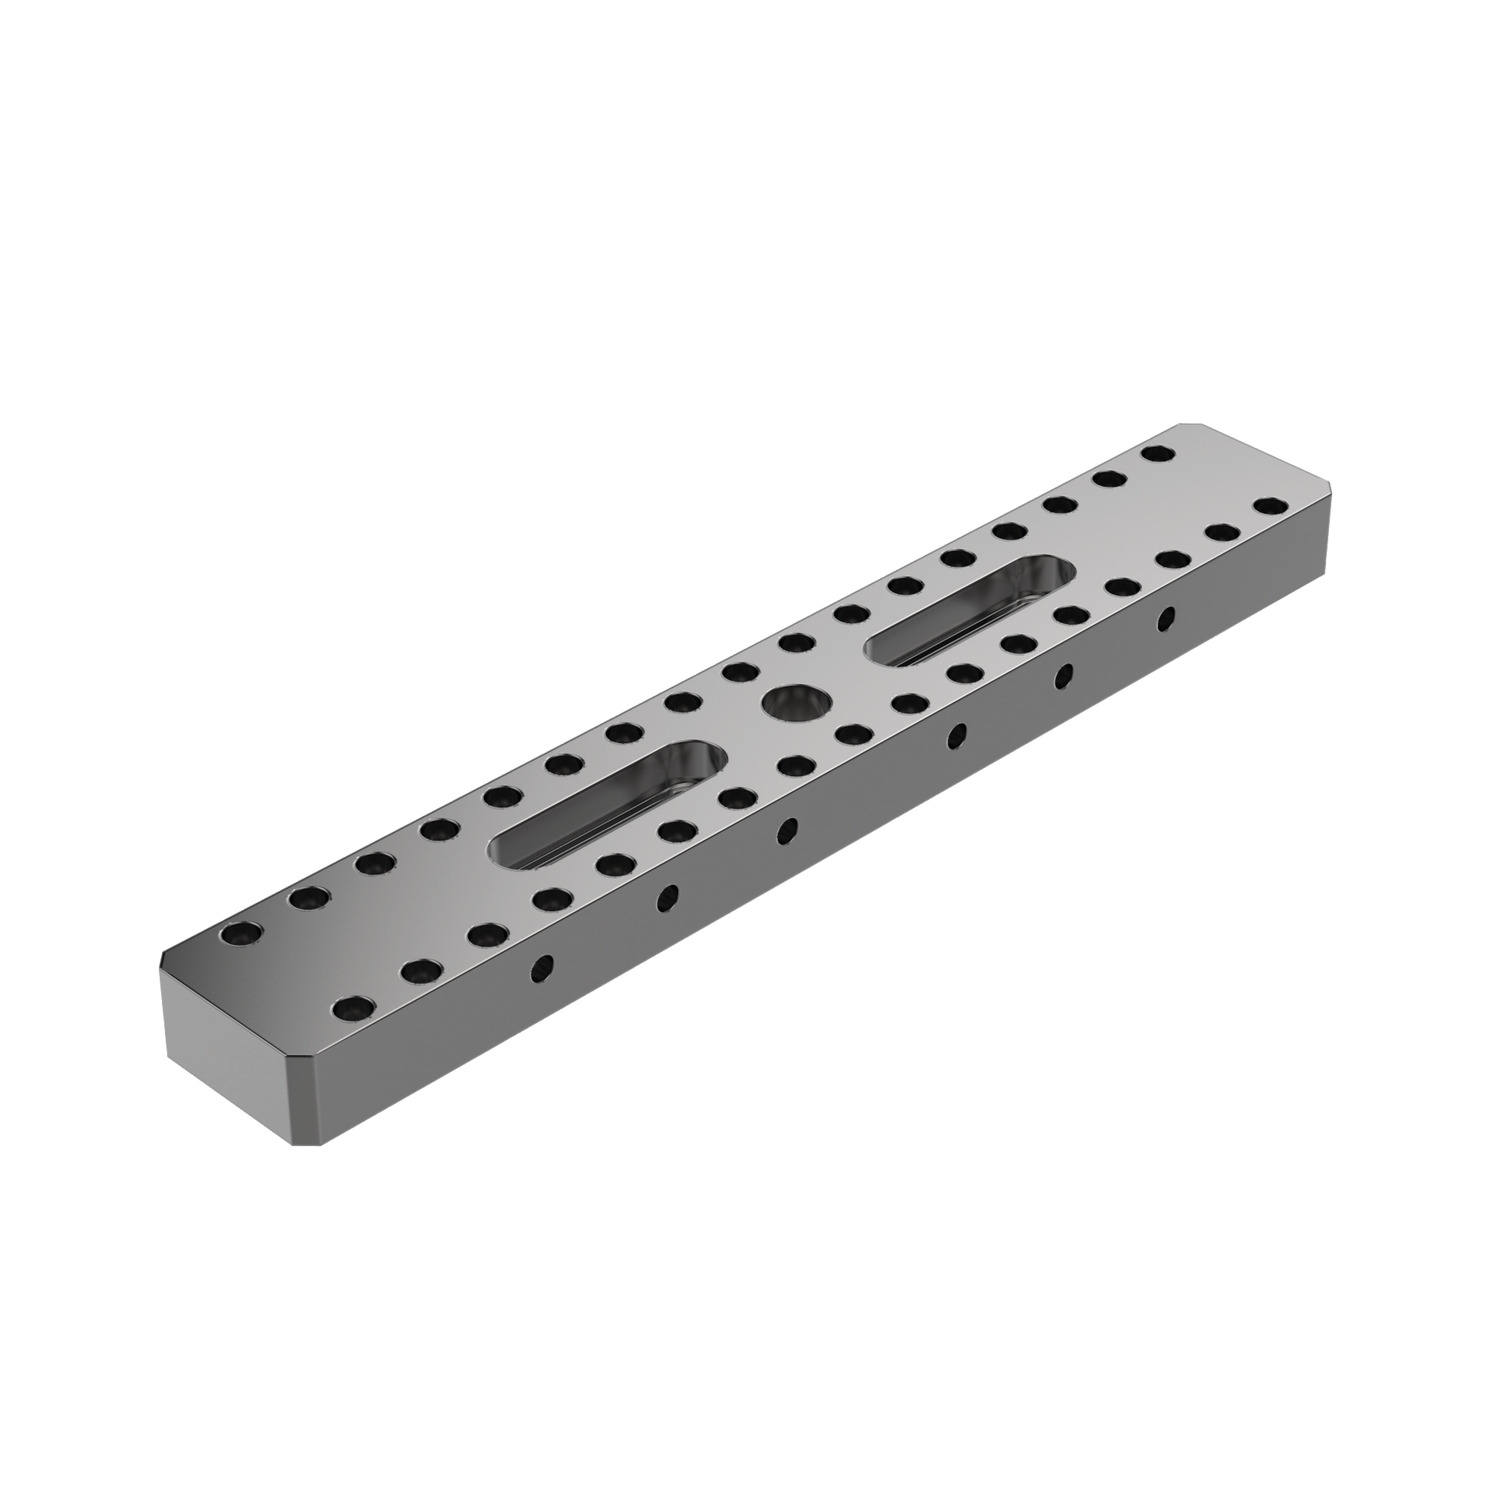 Product 11046, Base Plates Finger - Long for 2.2 ton clamps / 